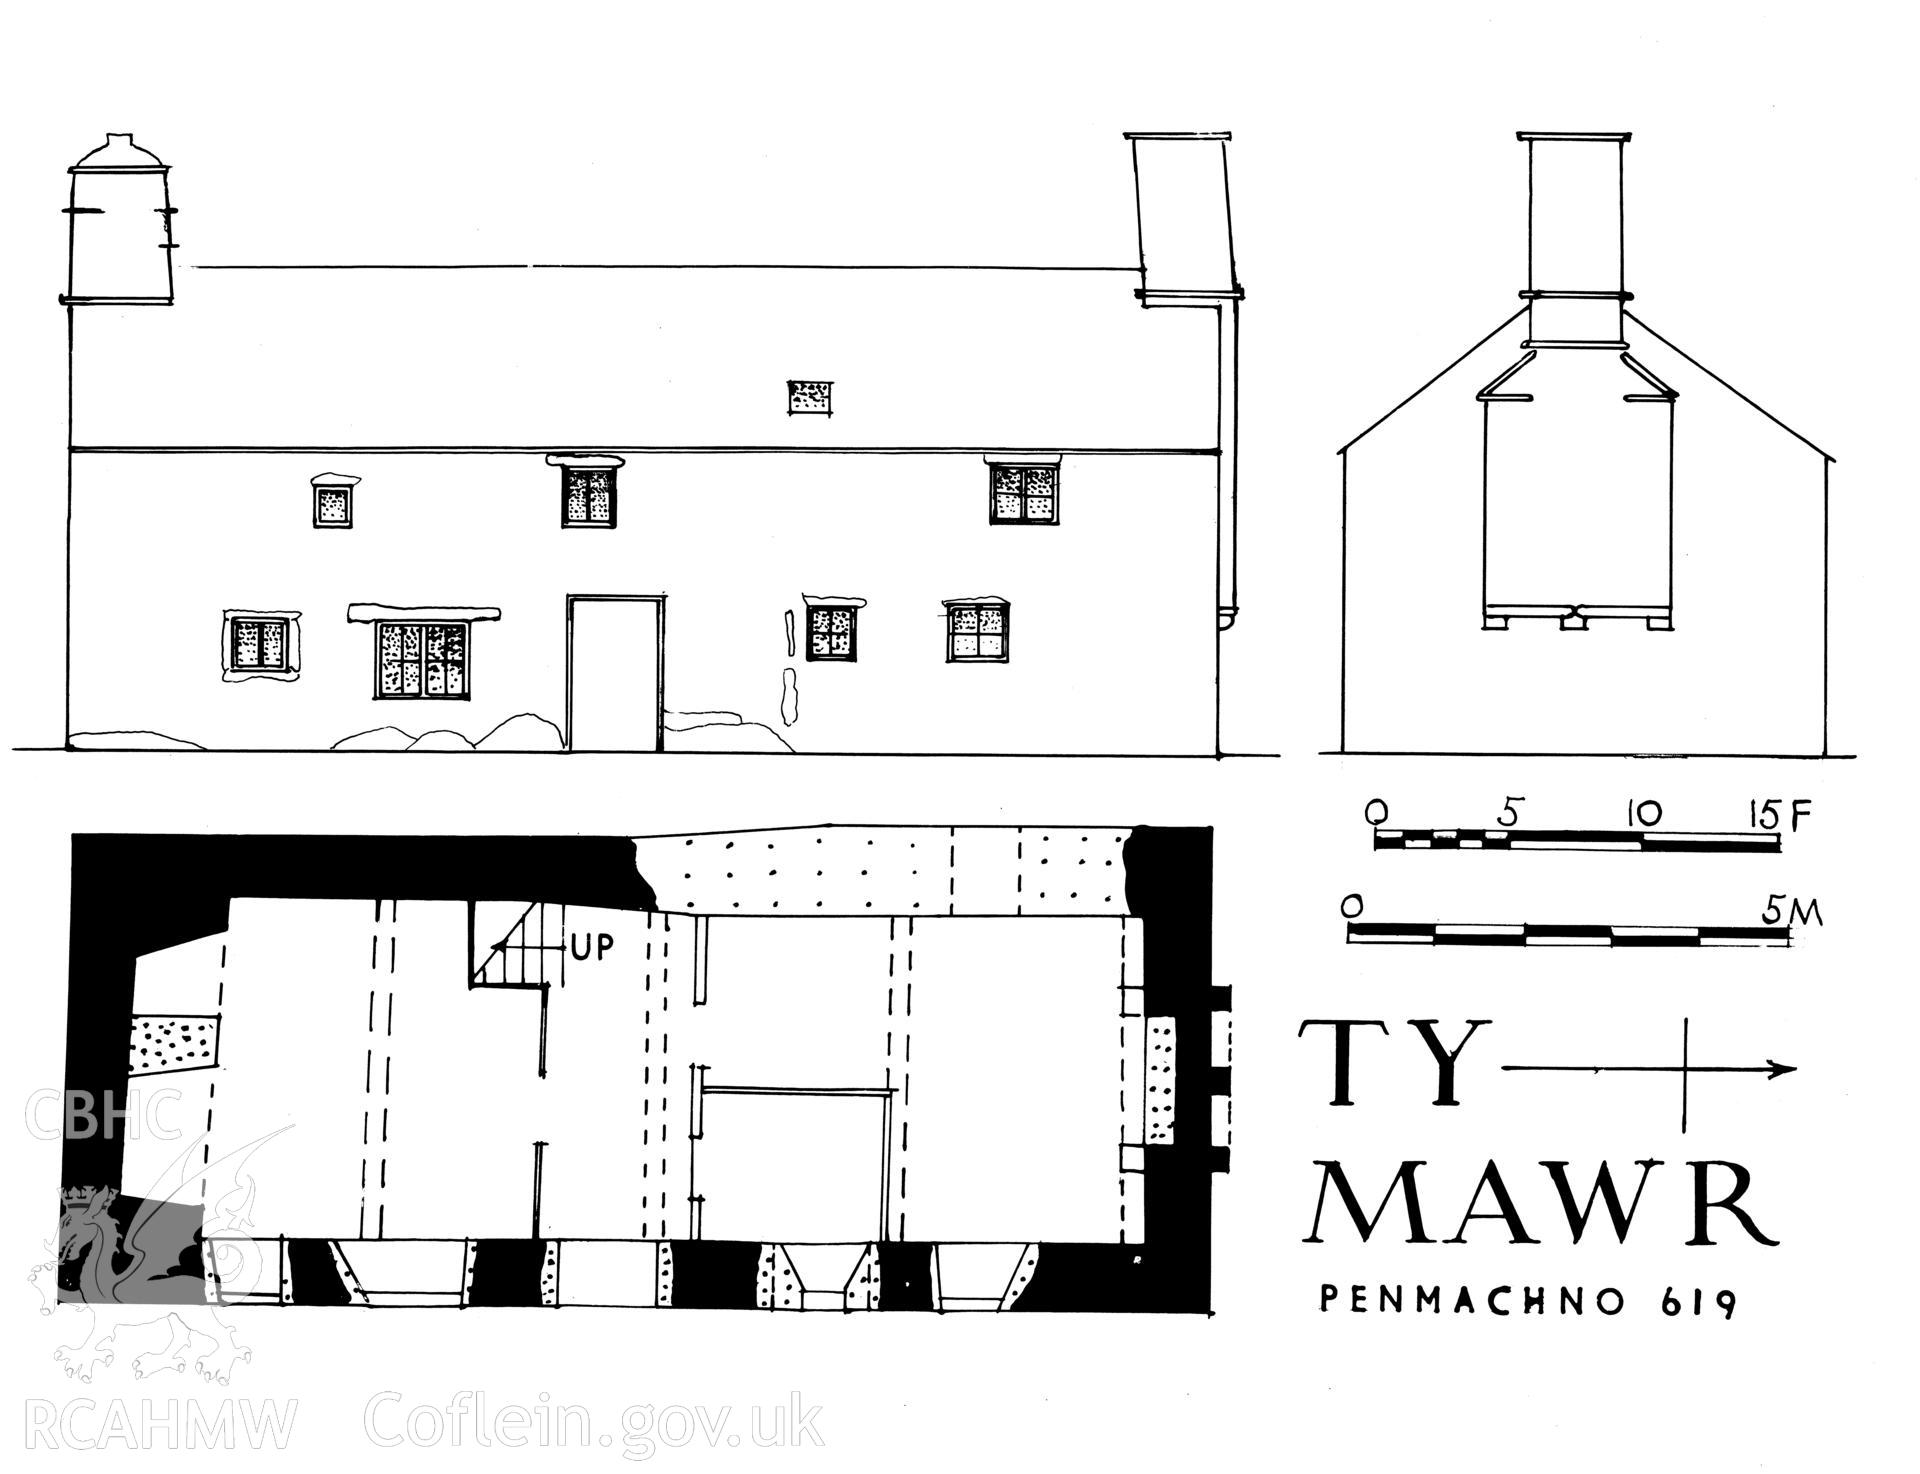 RCAHMW drawing (ink on linen) showing plan, section & elevation of Ty Mawr, Gwibernant, as published in Caerns Inventory Volume I, fig 168.